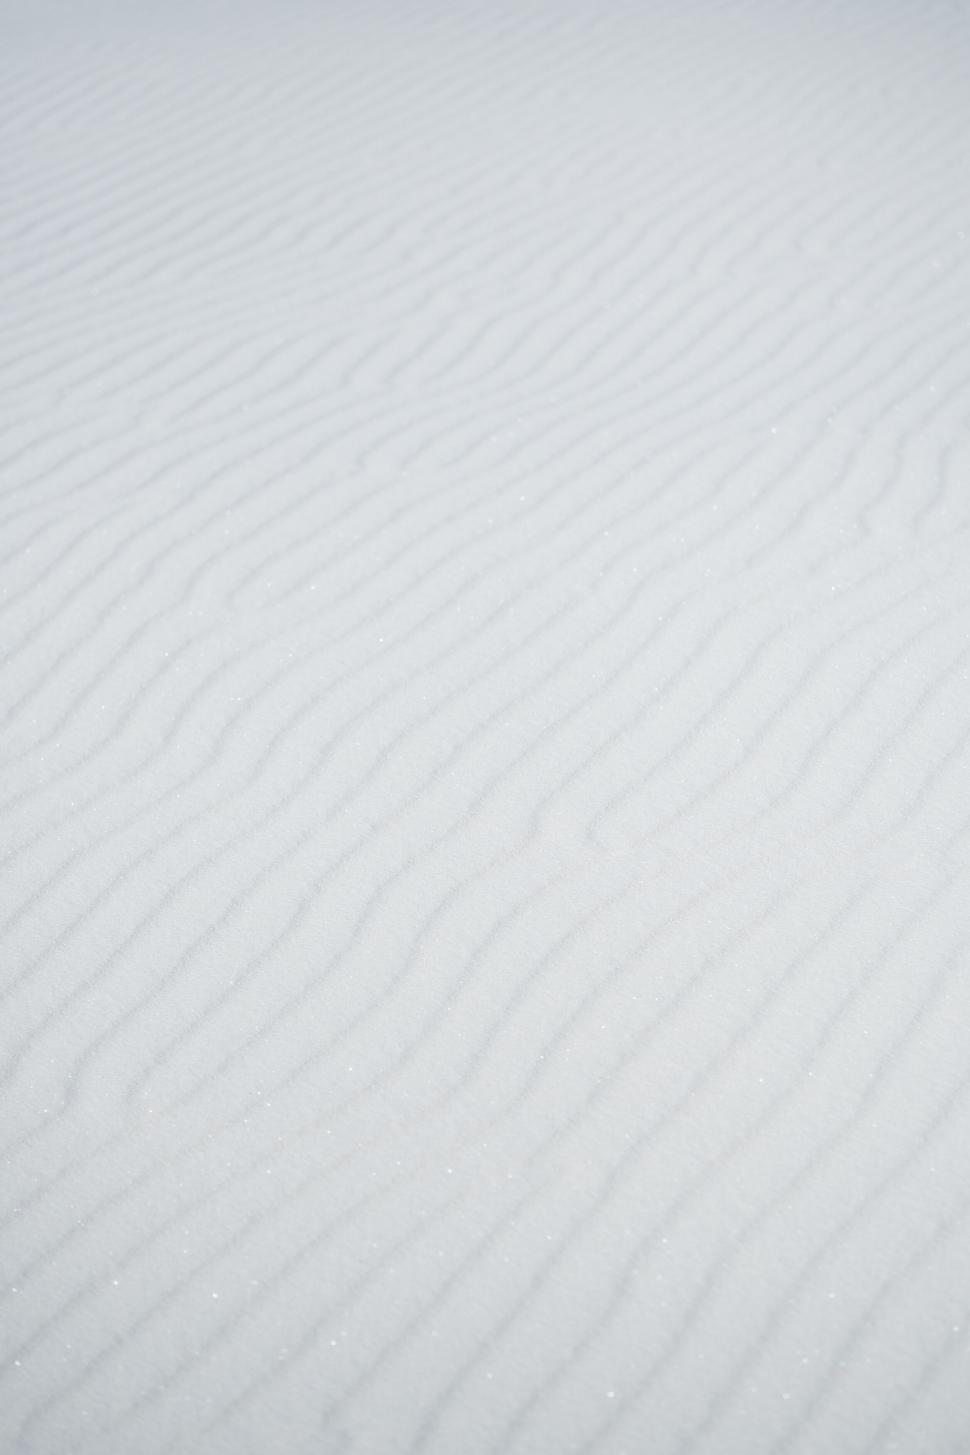 Free Image of A white sand with wavy lines 